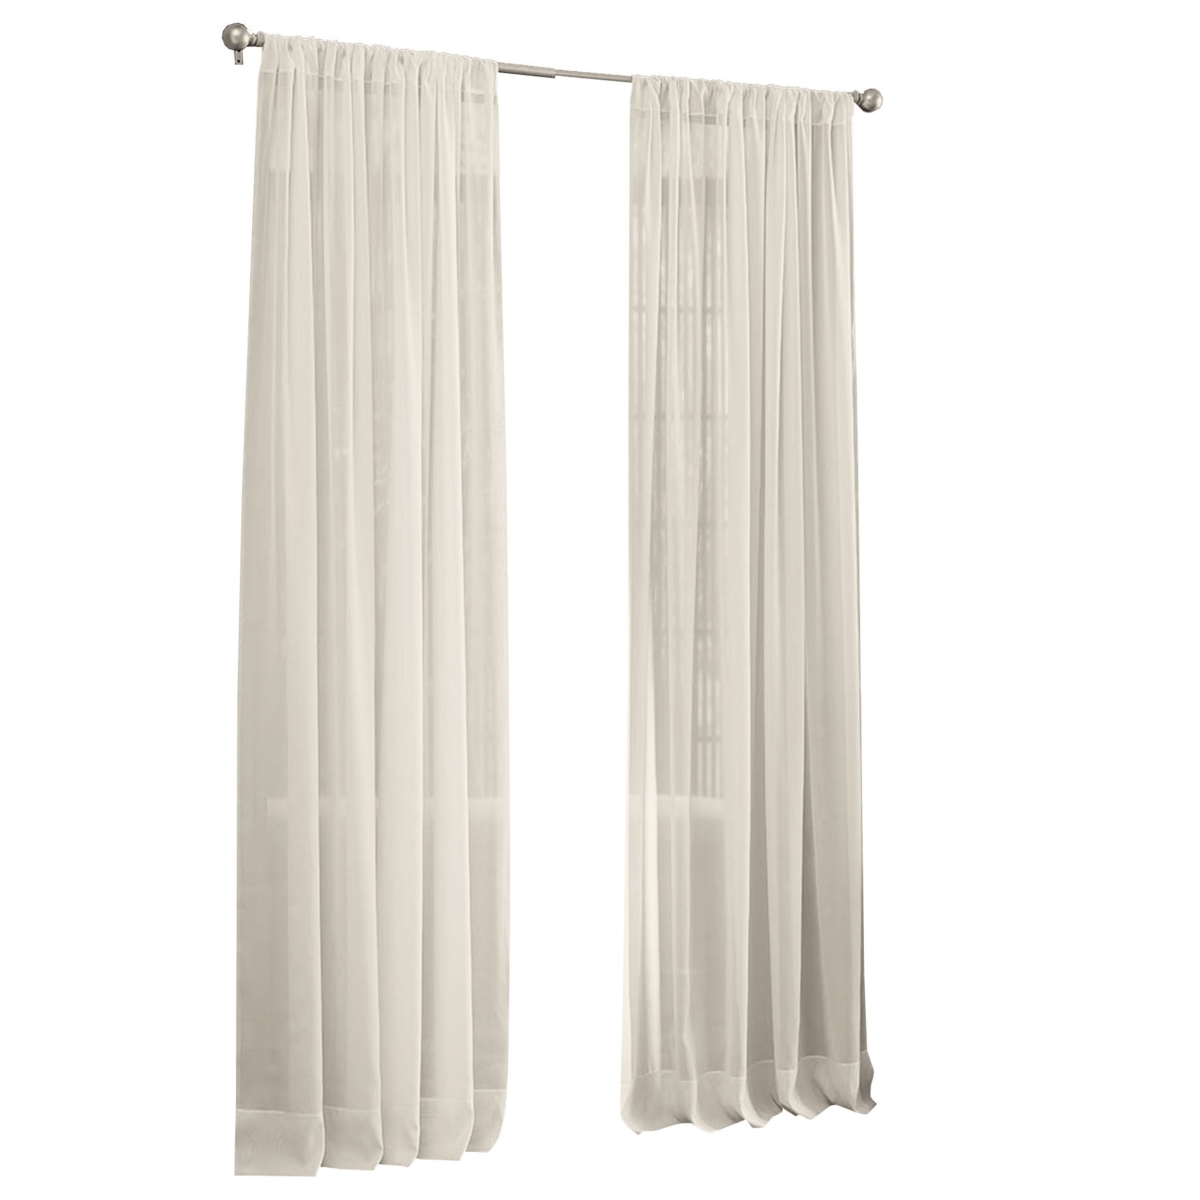 Voiledrap-118x84-ivory Sheer Voile Drape Panel, Ivory - 118 X 84 In.